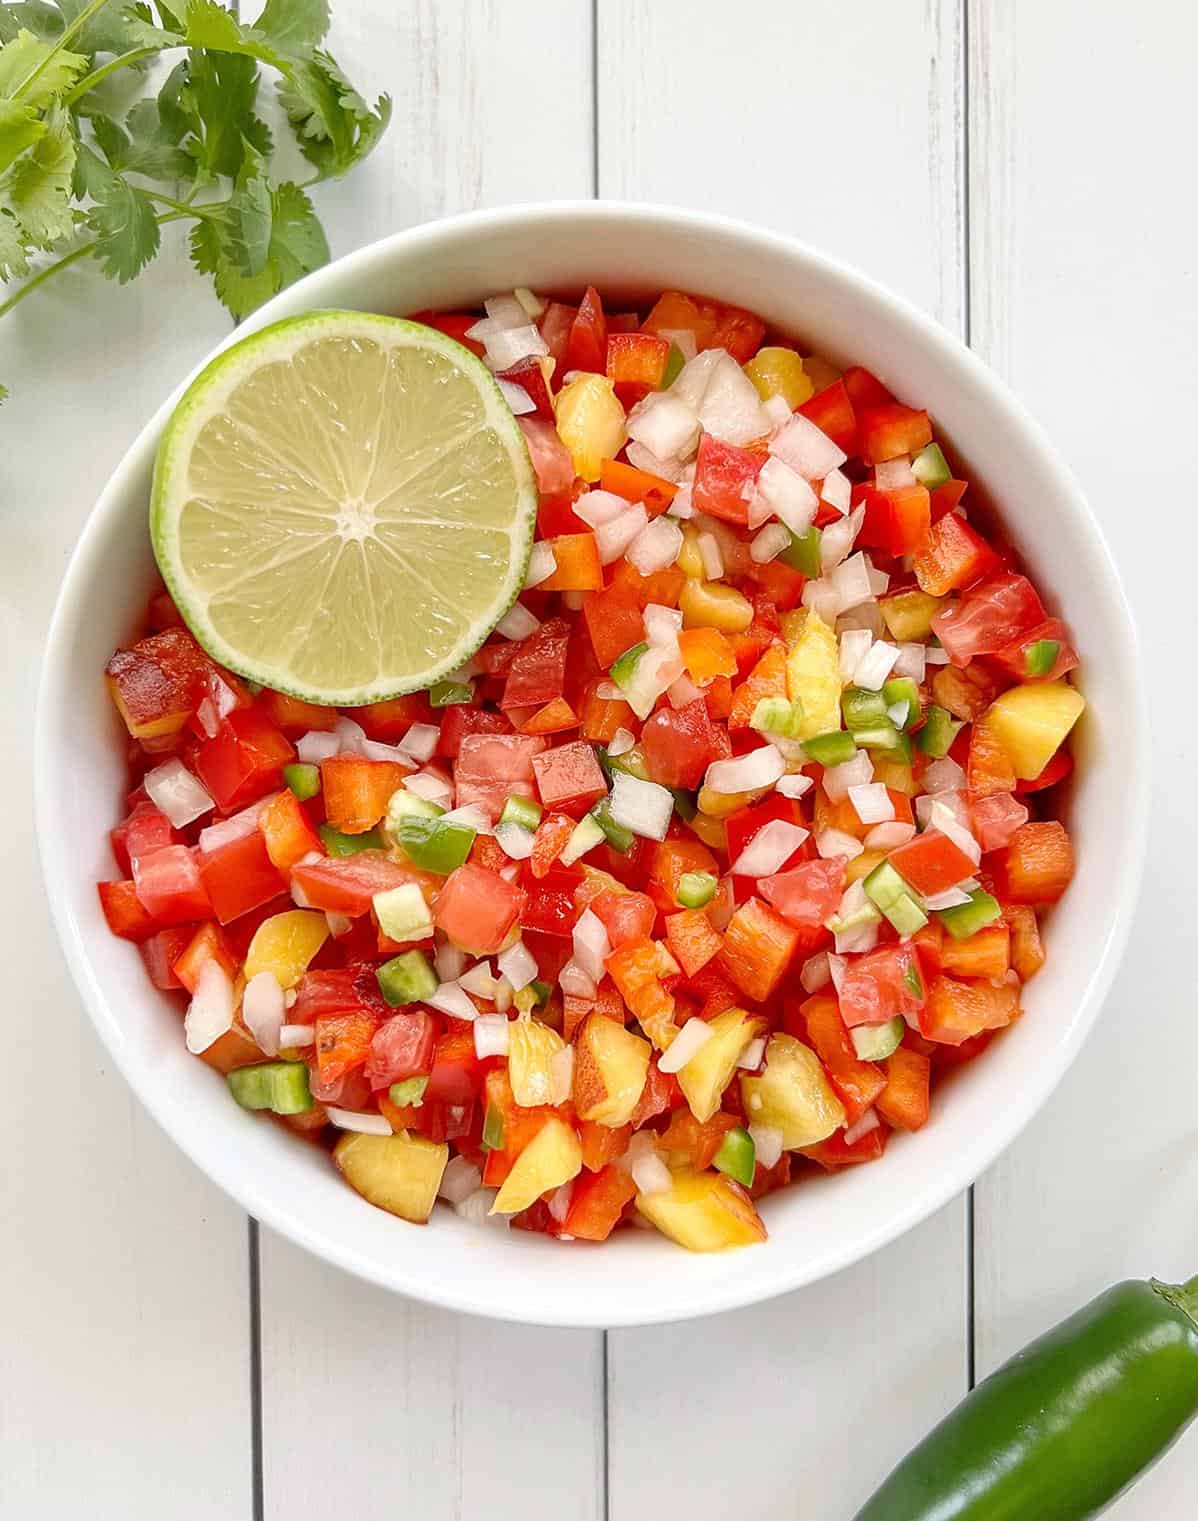  The combination of sweet and spicy flavors make this salsa a crowd-pleaser.